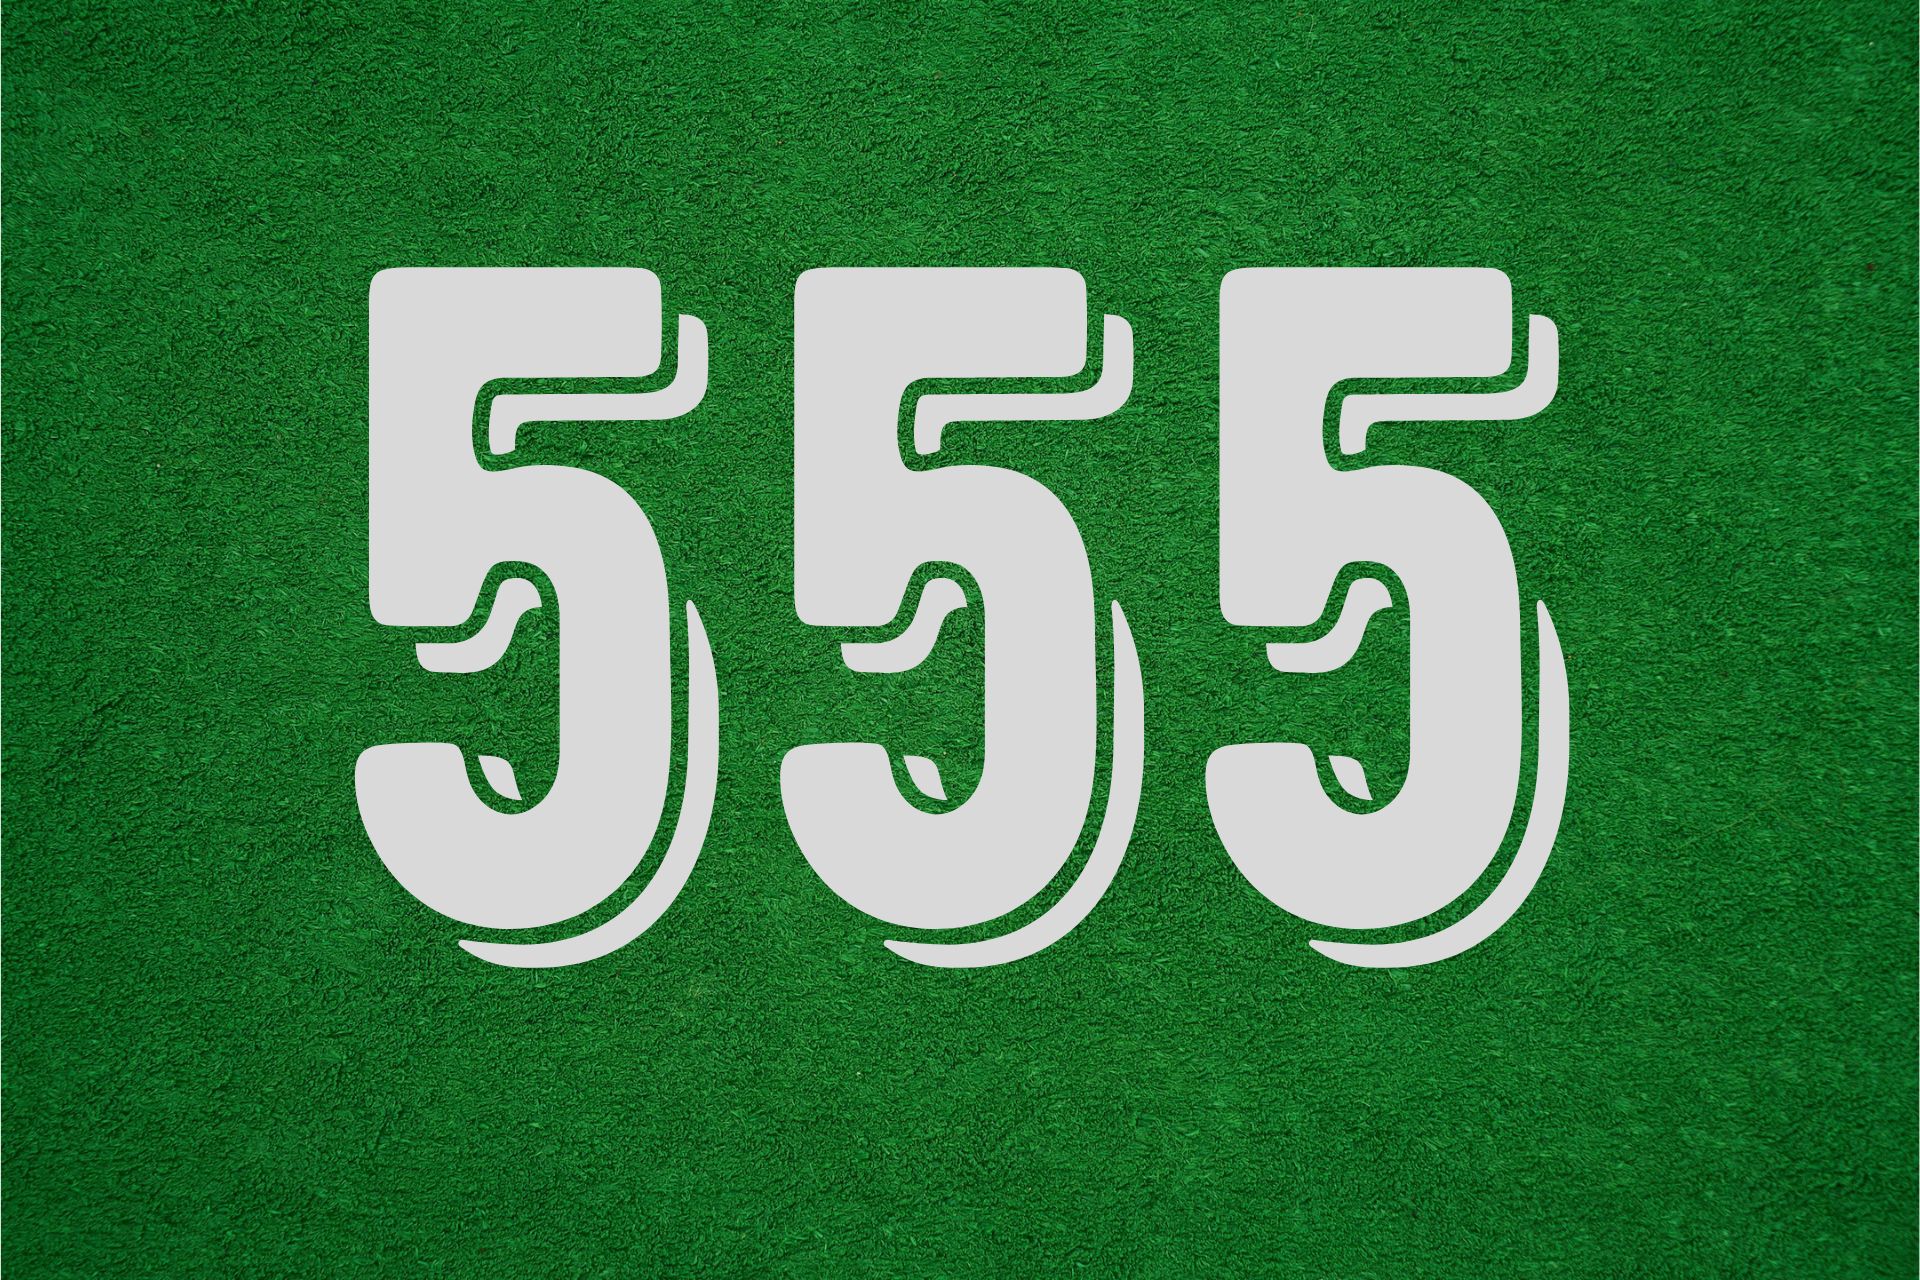 Angel Number For Healing 555 - A Number To Bring Harmony Into Your Life